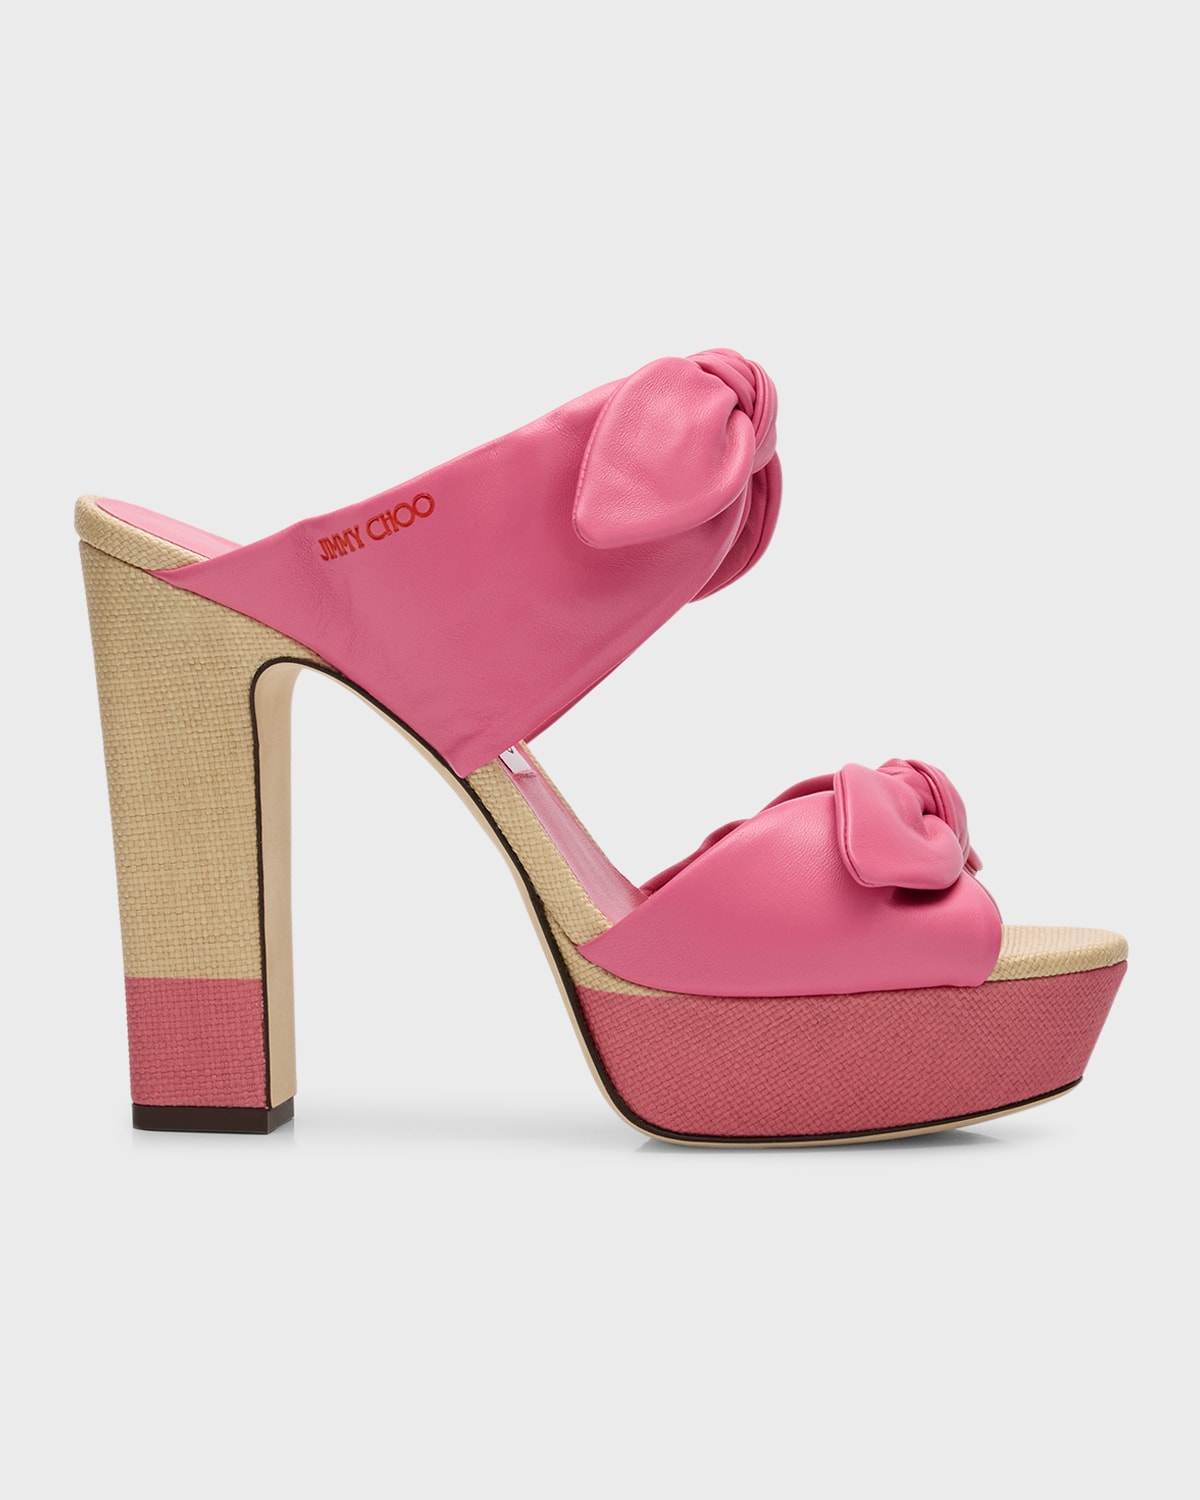 Jimmy Choo Rua Knotted Bow Platform Slide Sandals In Candy Pink/natura